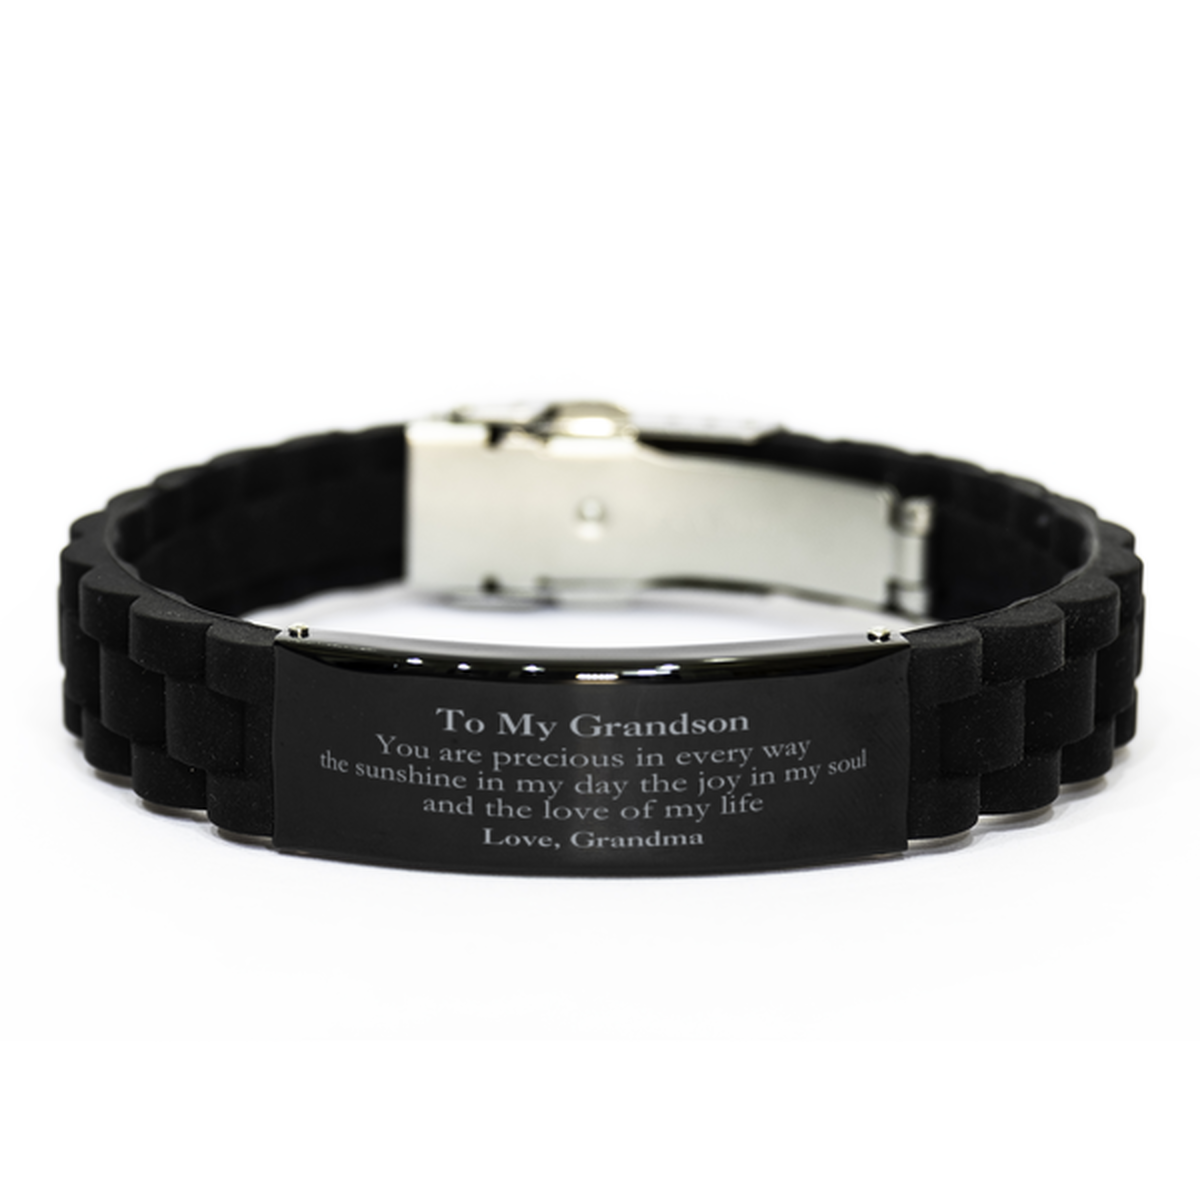 Graduation Gifts for Grandson Black Glidelock Clasp Bracelet Present from Grandma, Christmas Grandson Birthday Gifts Grandson You are precious in every way the sunshine in my day. Love, Grandma